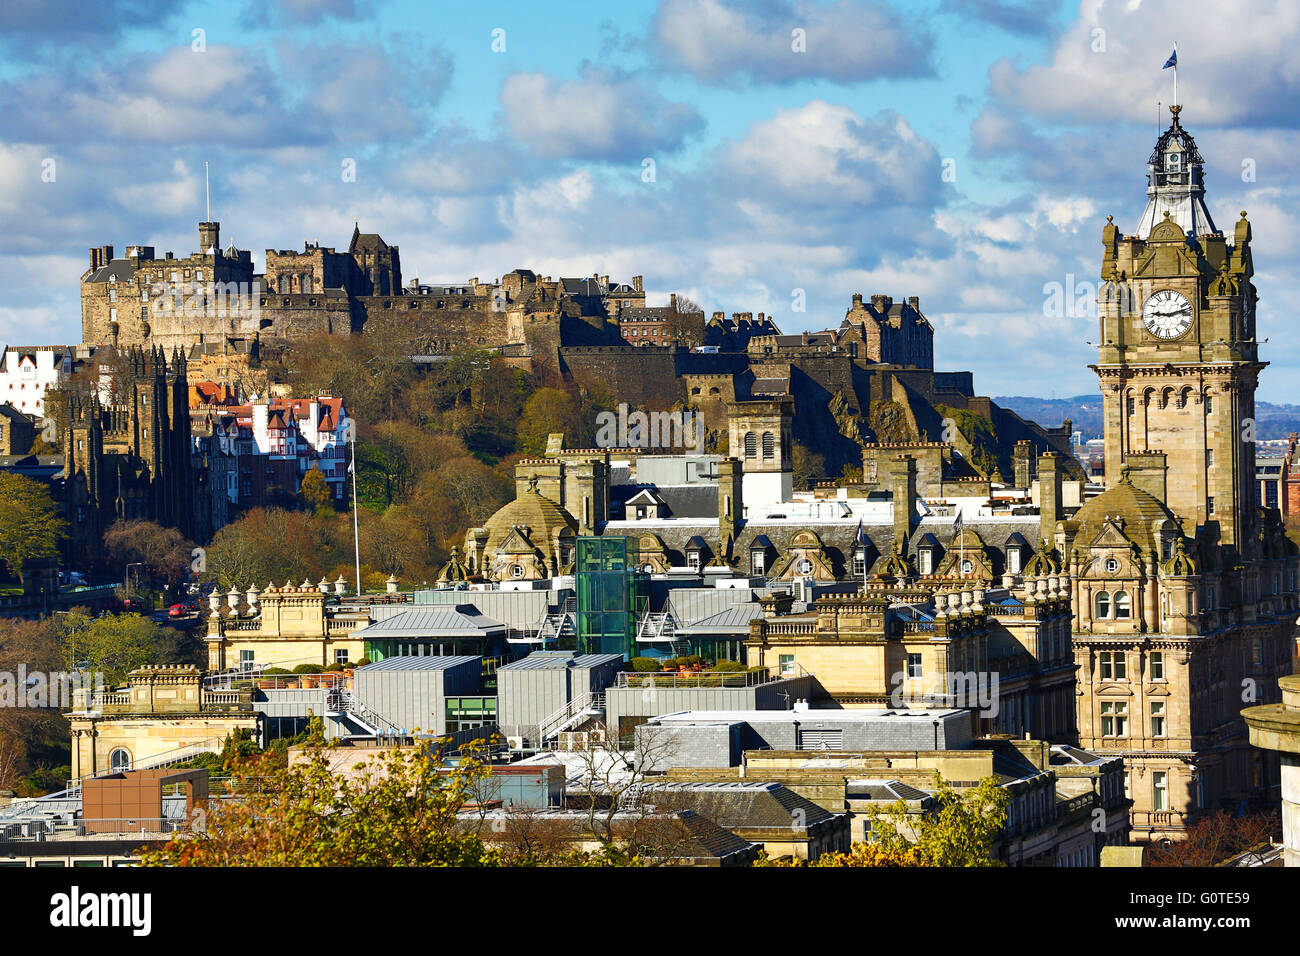 General city skyline view from Calton Hill showing the Balmoral Hotel clock tower and Edinburgh Castle in Edinburgh, Scotland UK Stock Photo